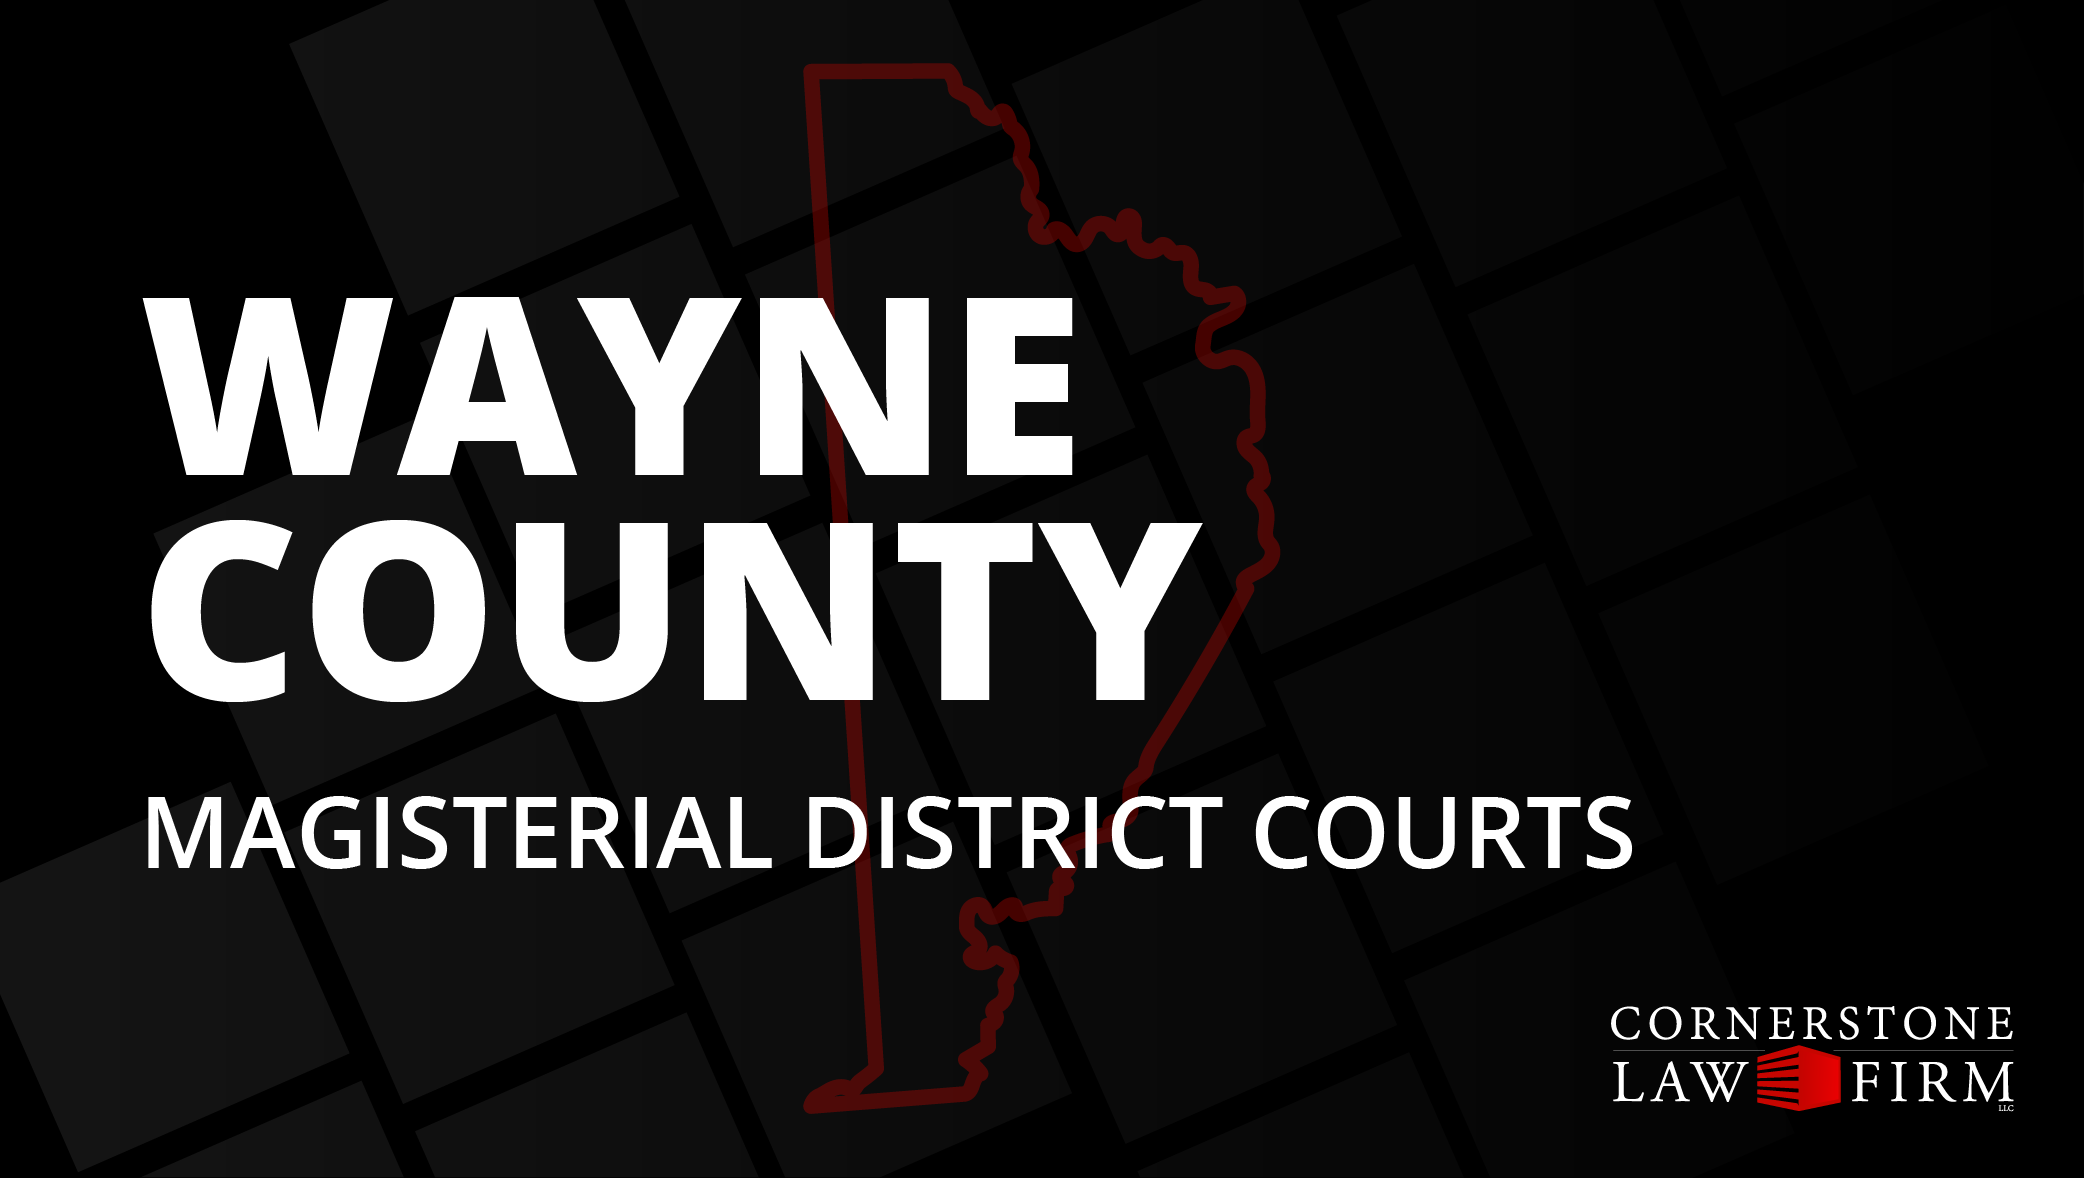 The words "Wayne County Magisterial District Courts" over a black background with a faded red outline of the county.